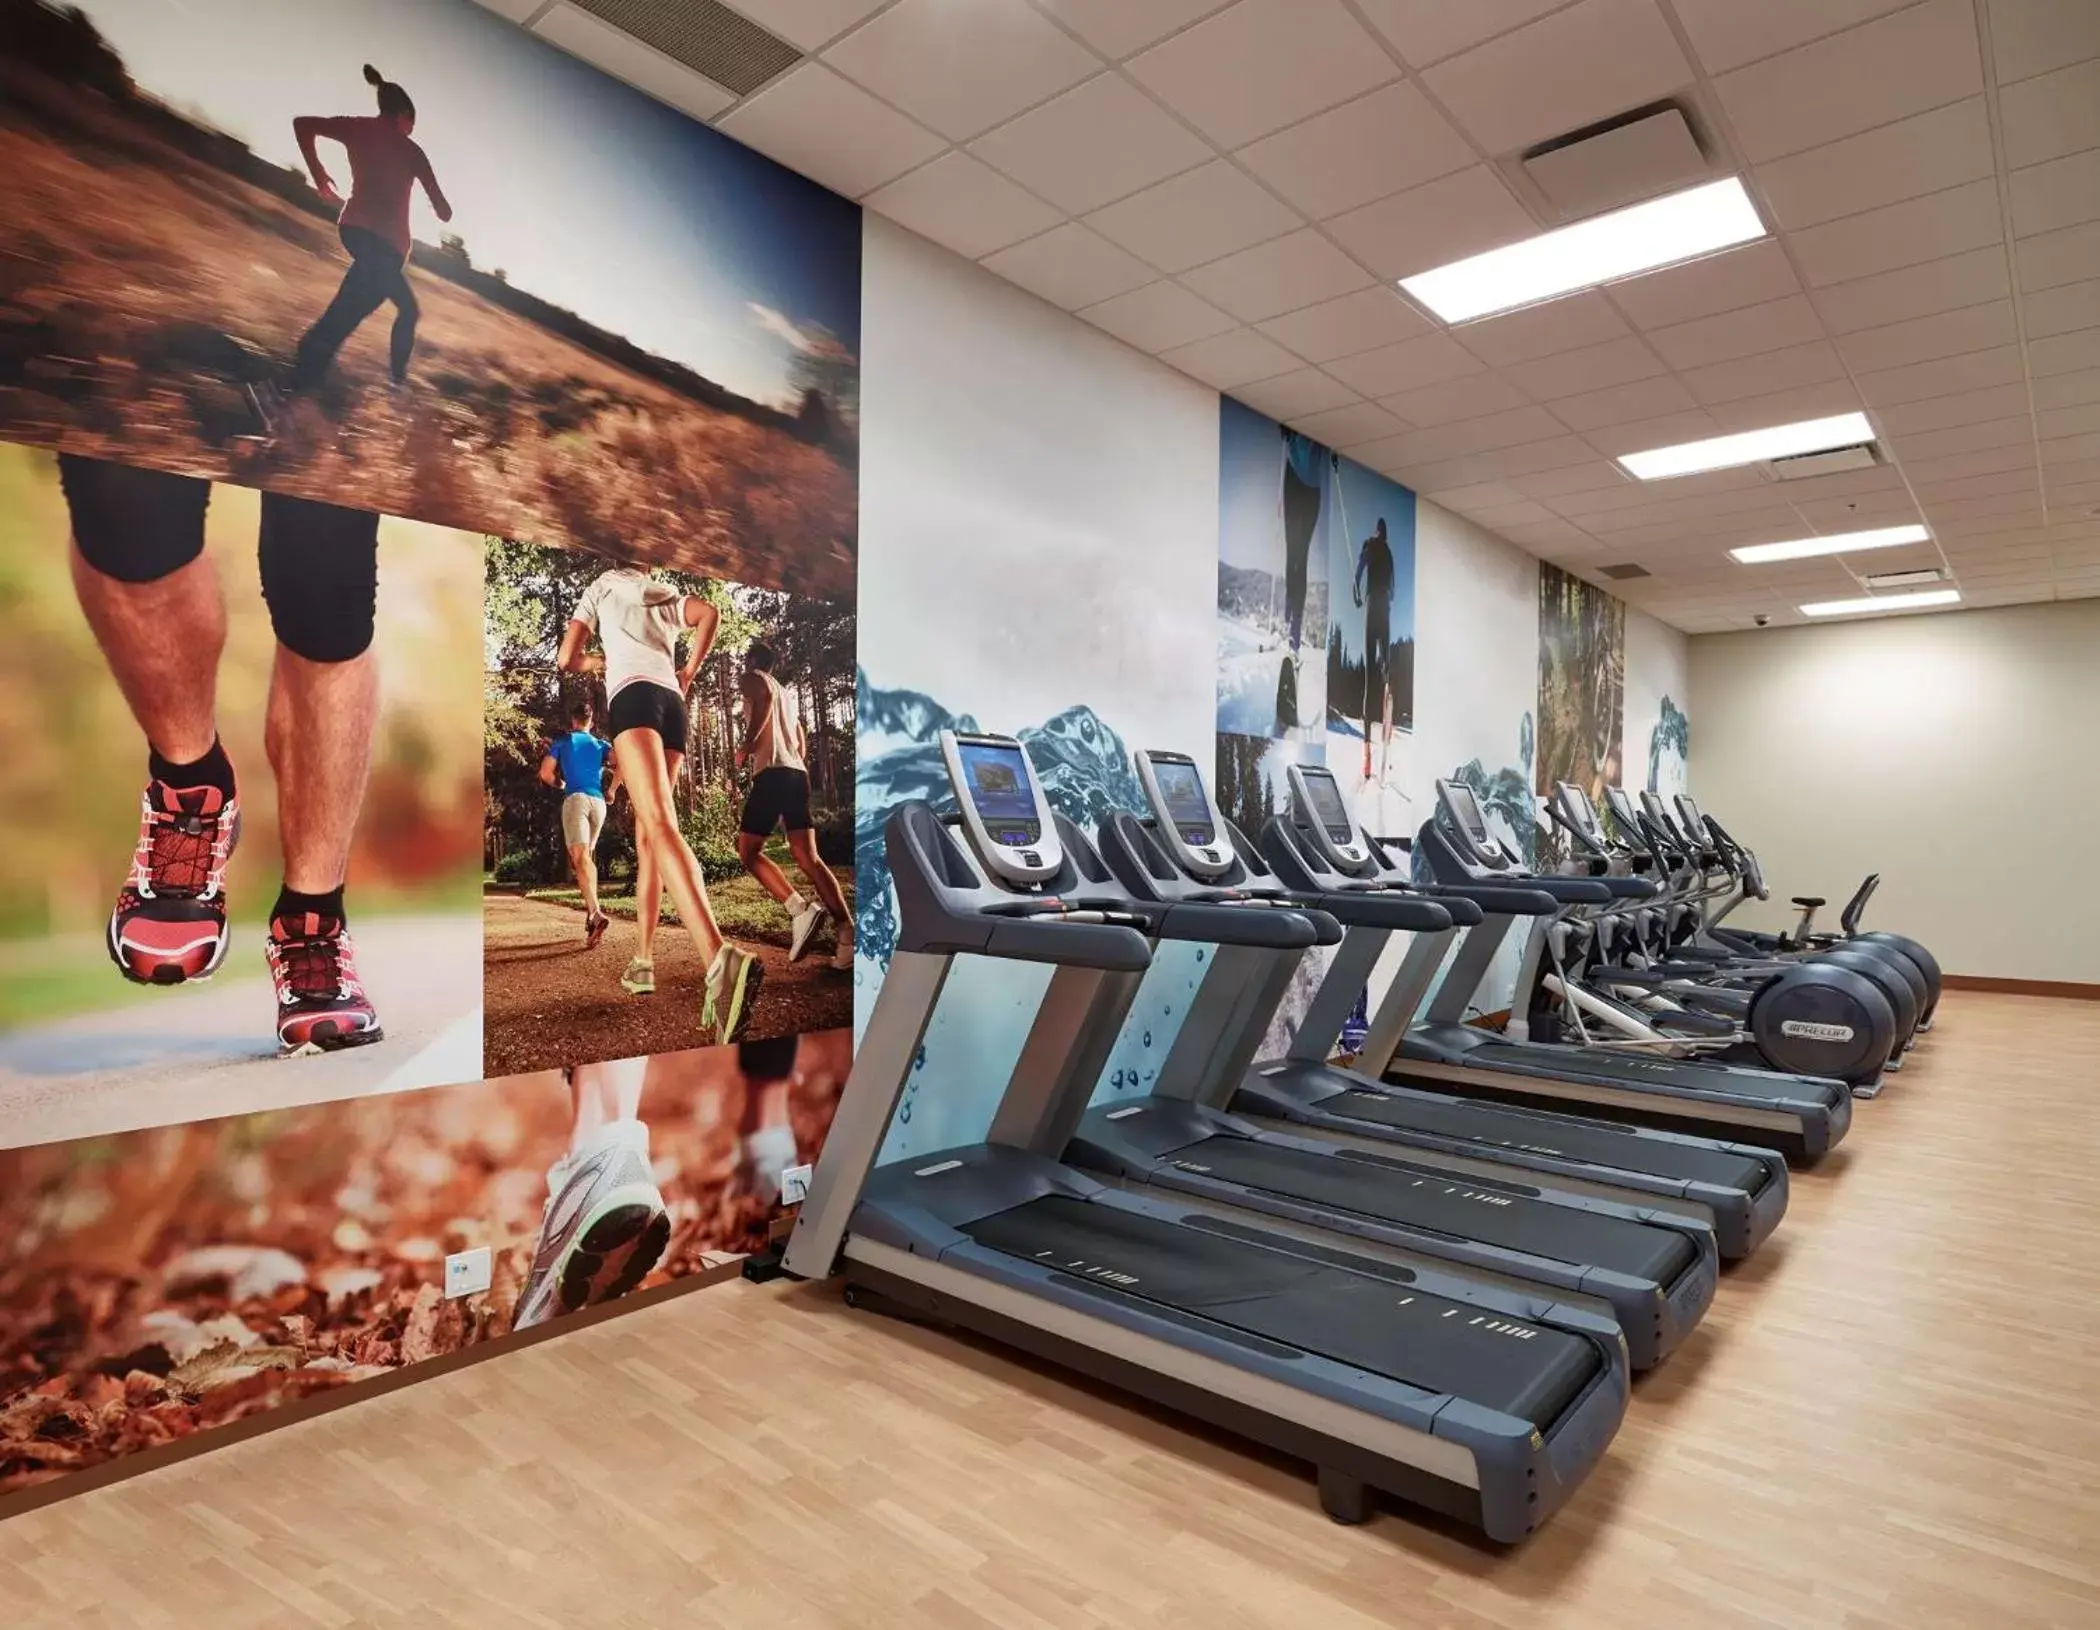 Fitness centre/facilities, Fitness Center/Facilities in DoubleTree by Hilton West Edmonton